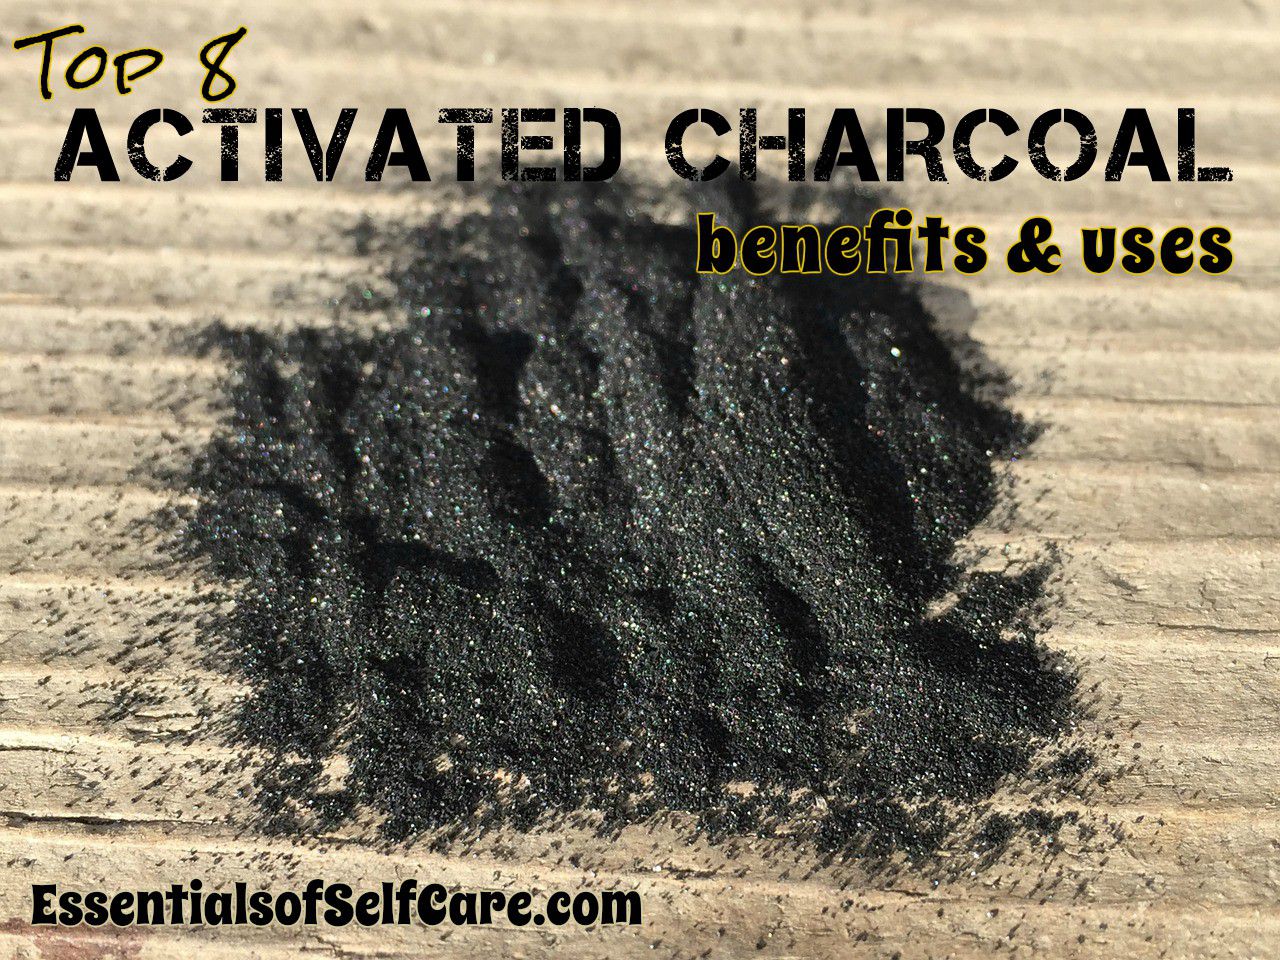 Top 8 Activated Charcoal Benefits & Uses – Nature’s Black Magic Gold